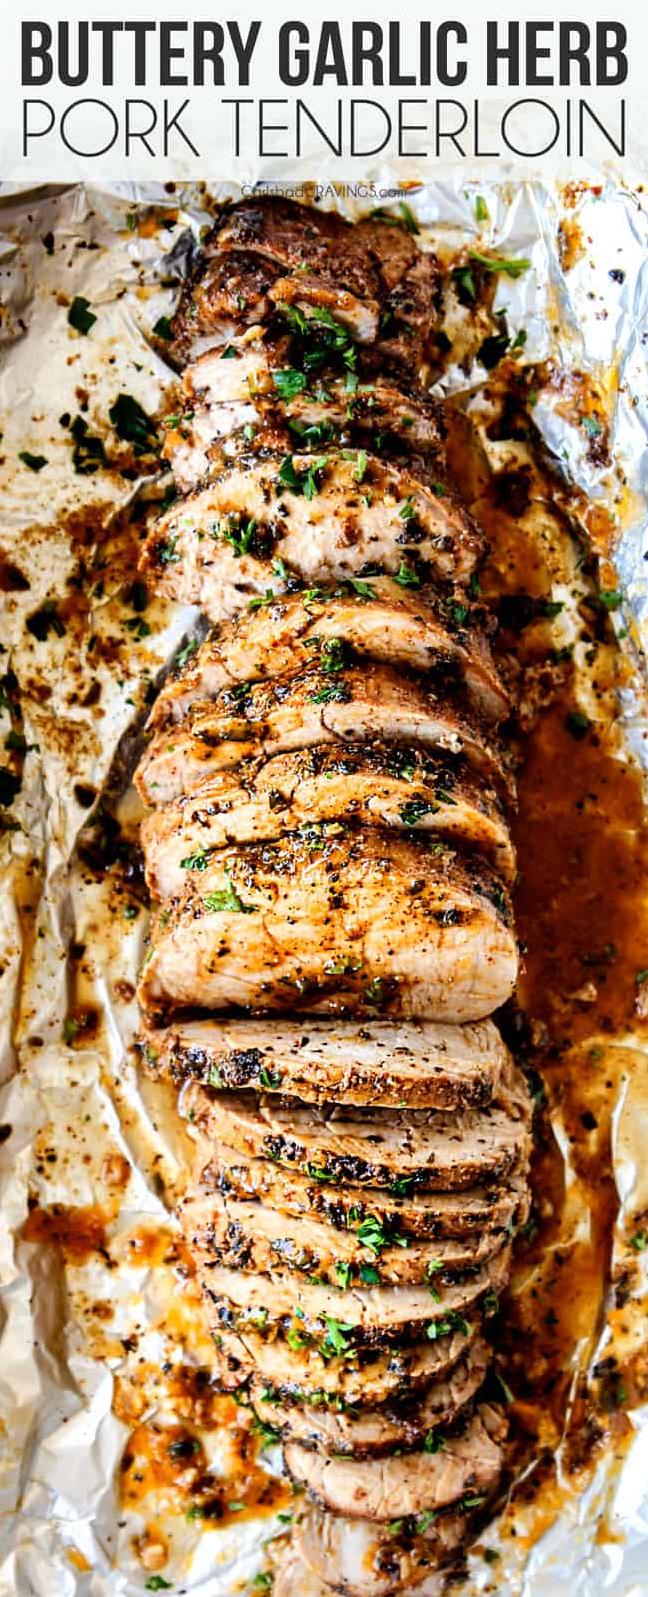  No need to go out for dinner, this Southern Pork Loin is an irresistible homemade treat